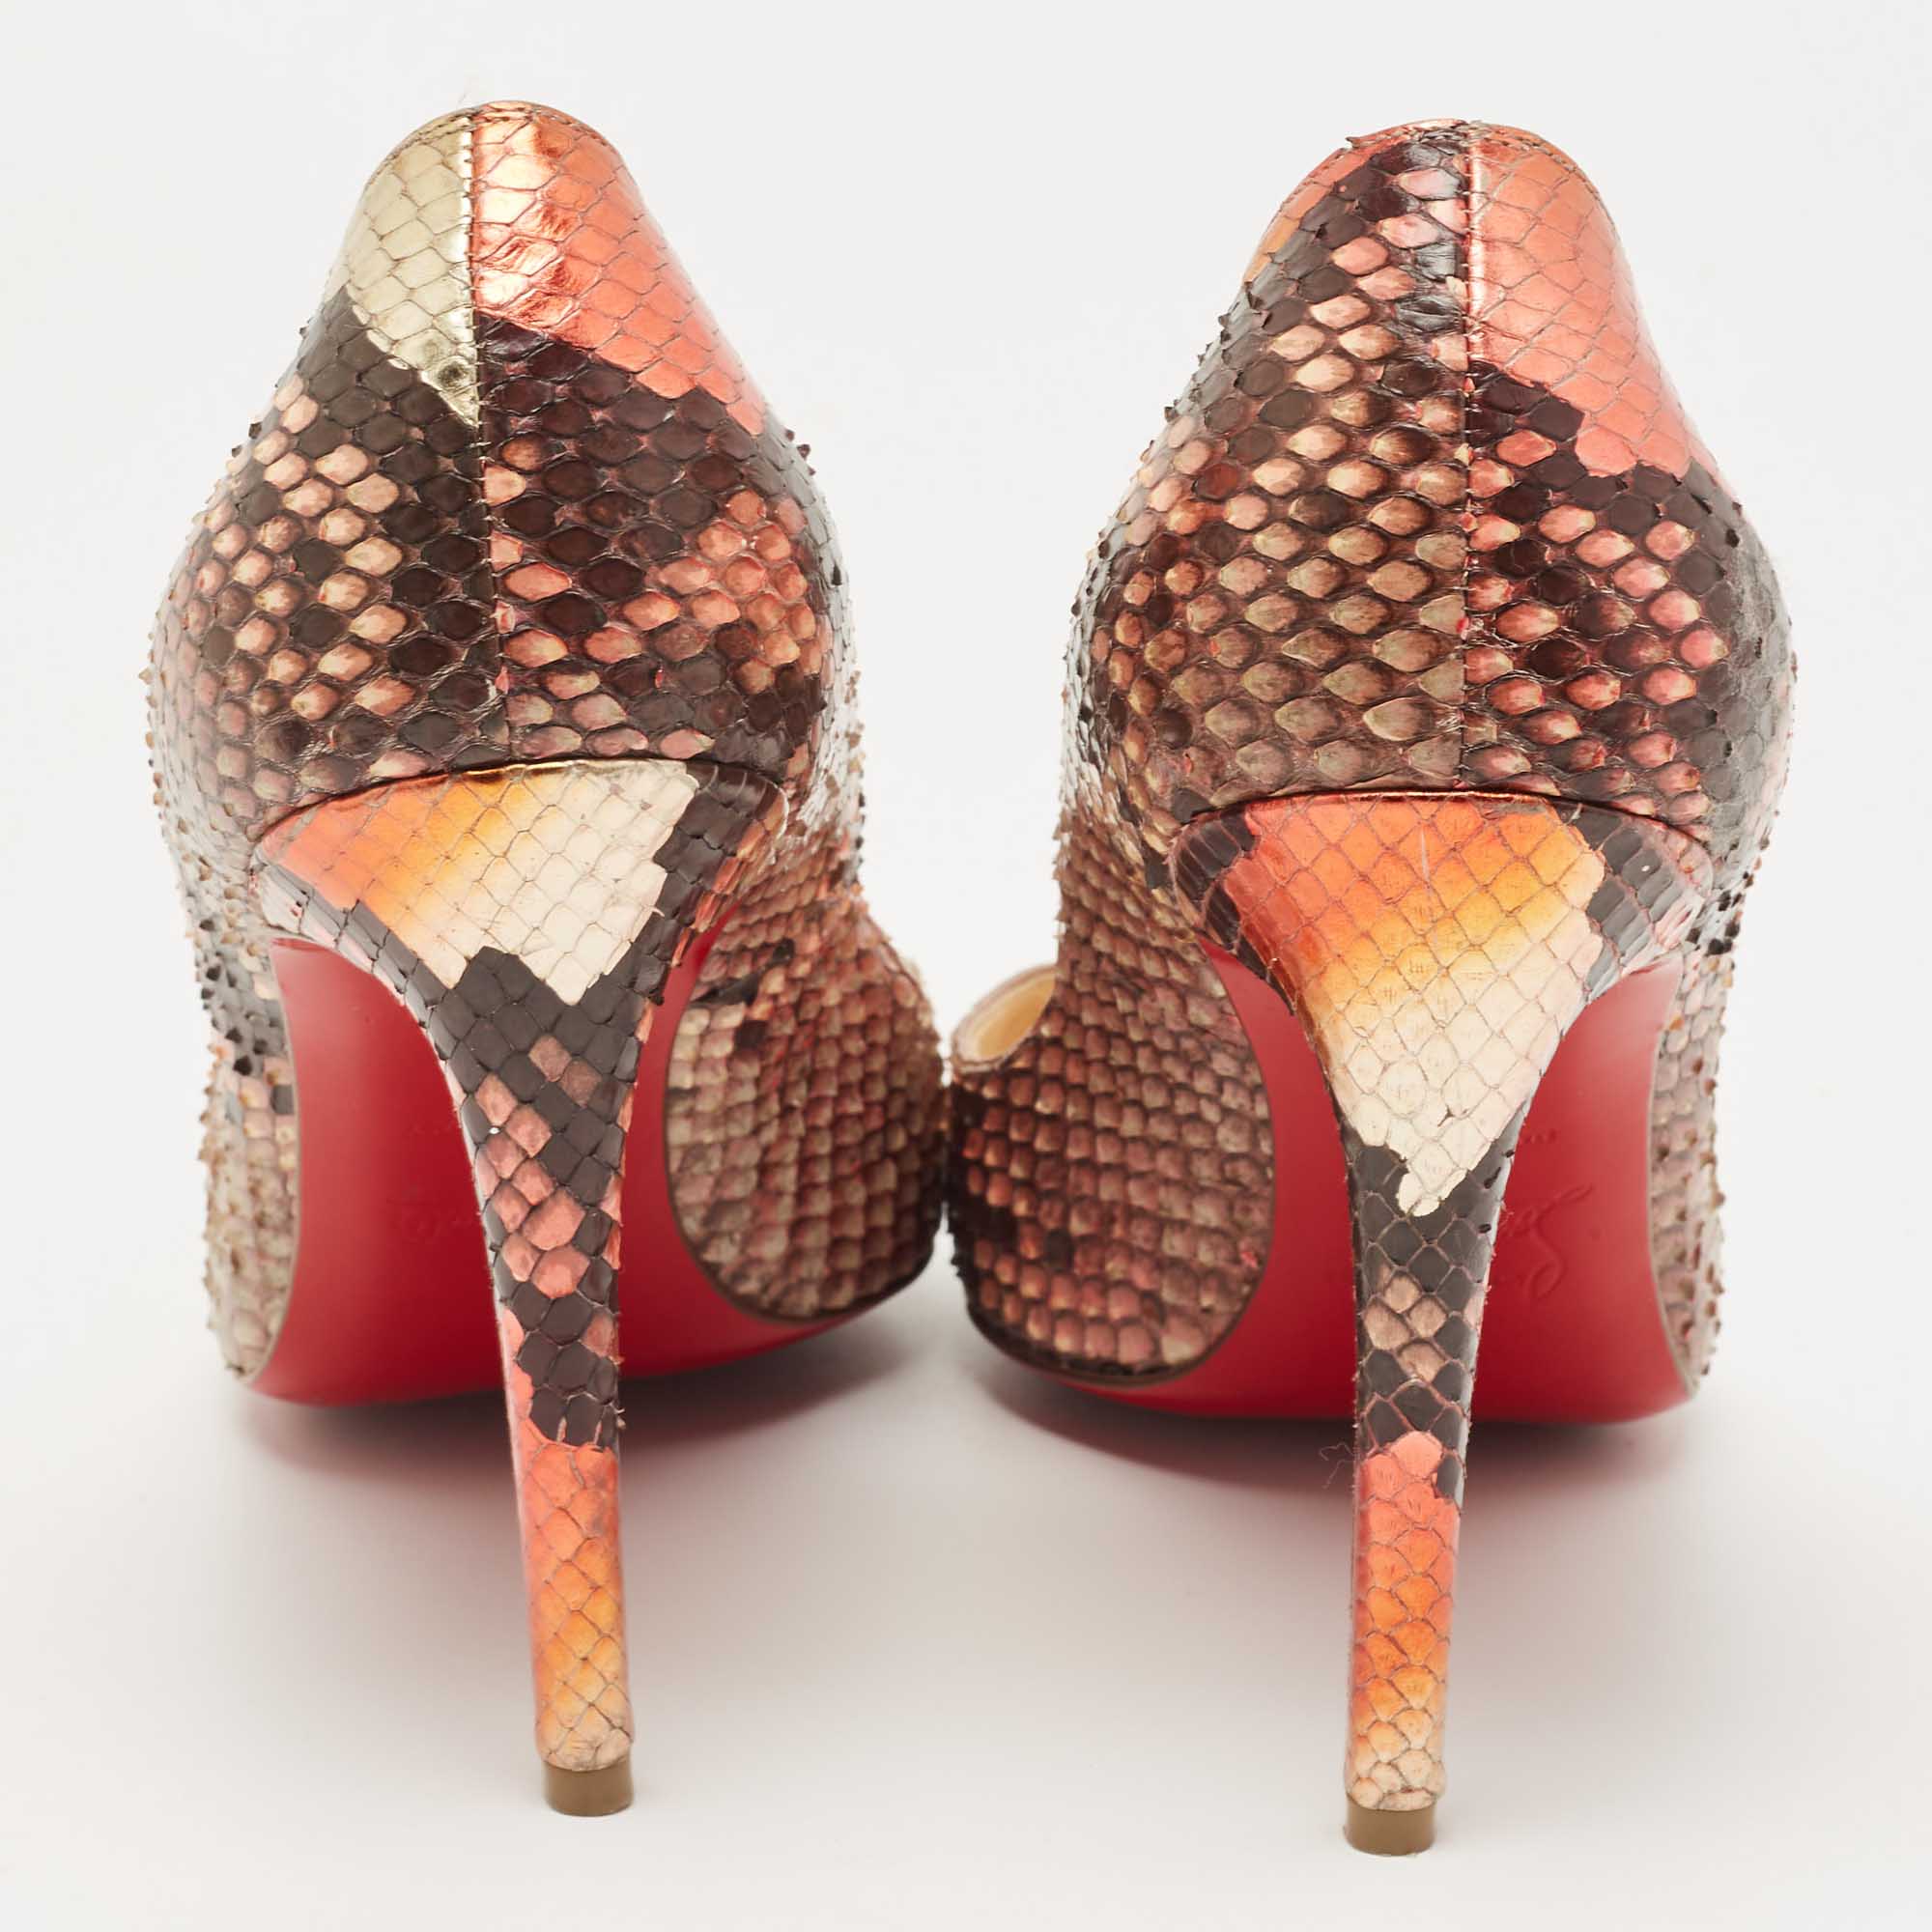 Christian Louboutin Multicolor Python Leather So Kate Pointed Toe Pumps Size 40.5